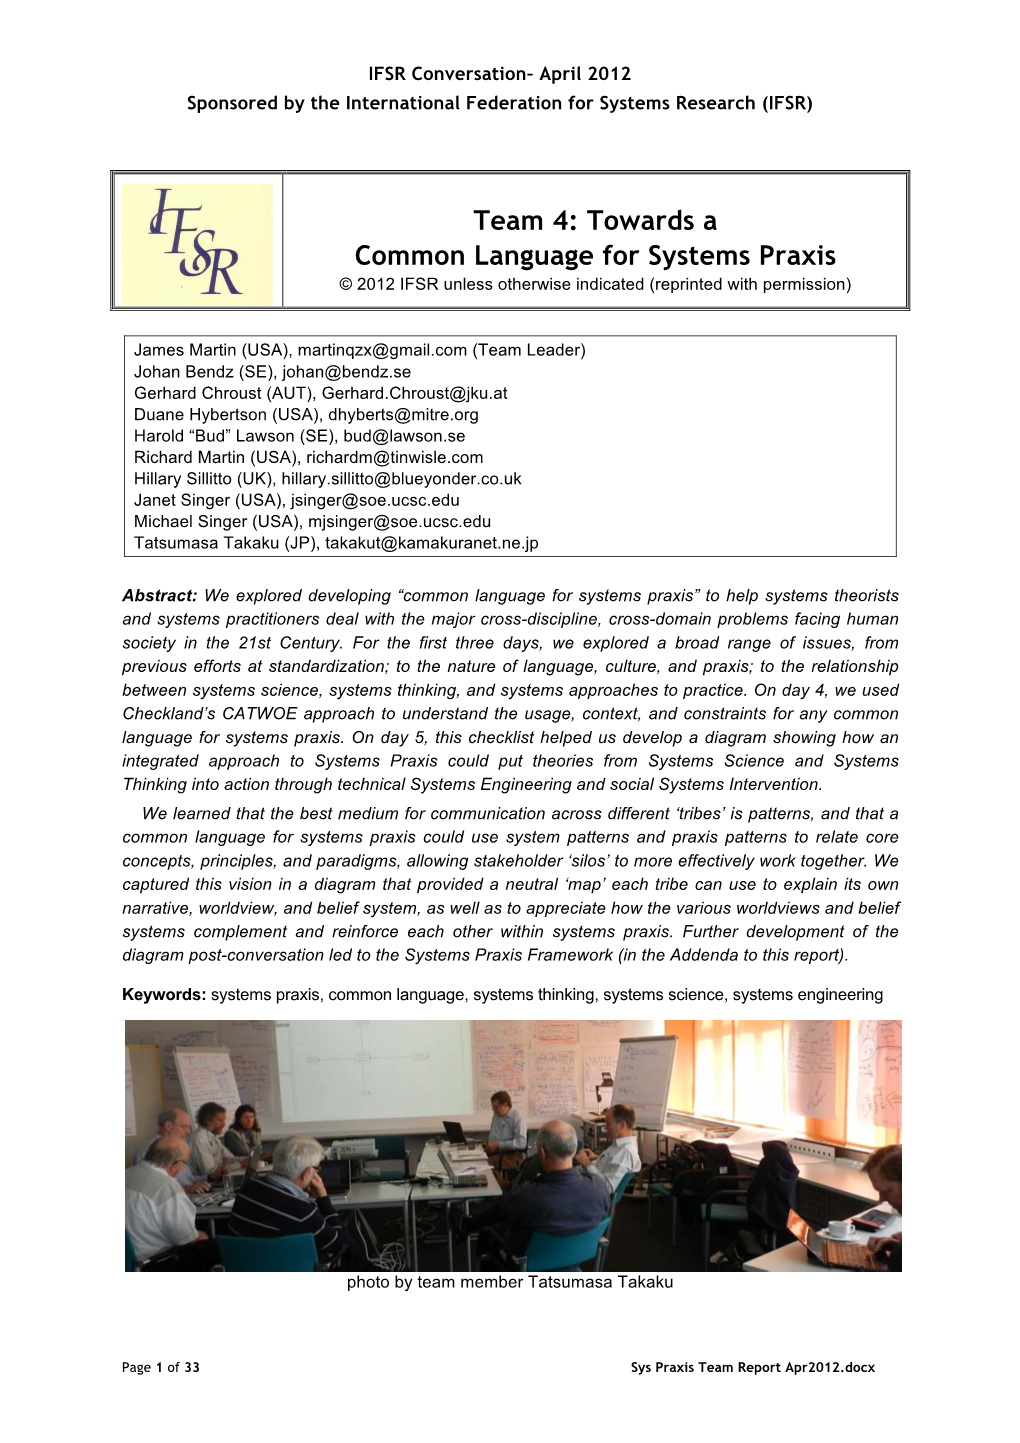 Toward a Common Language for Systems